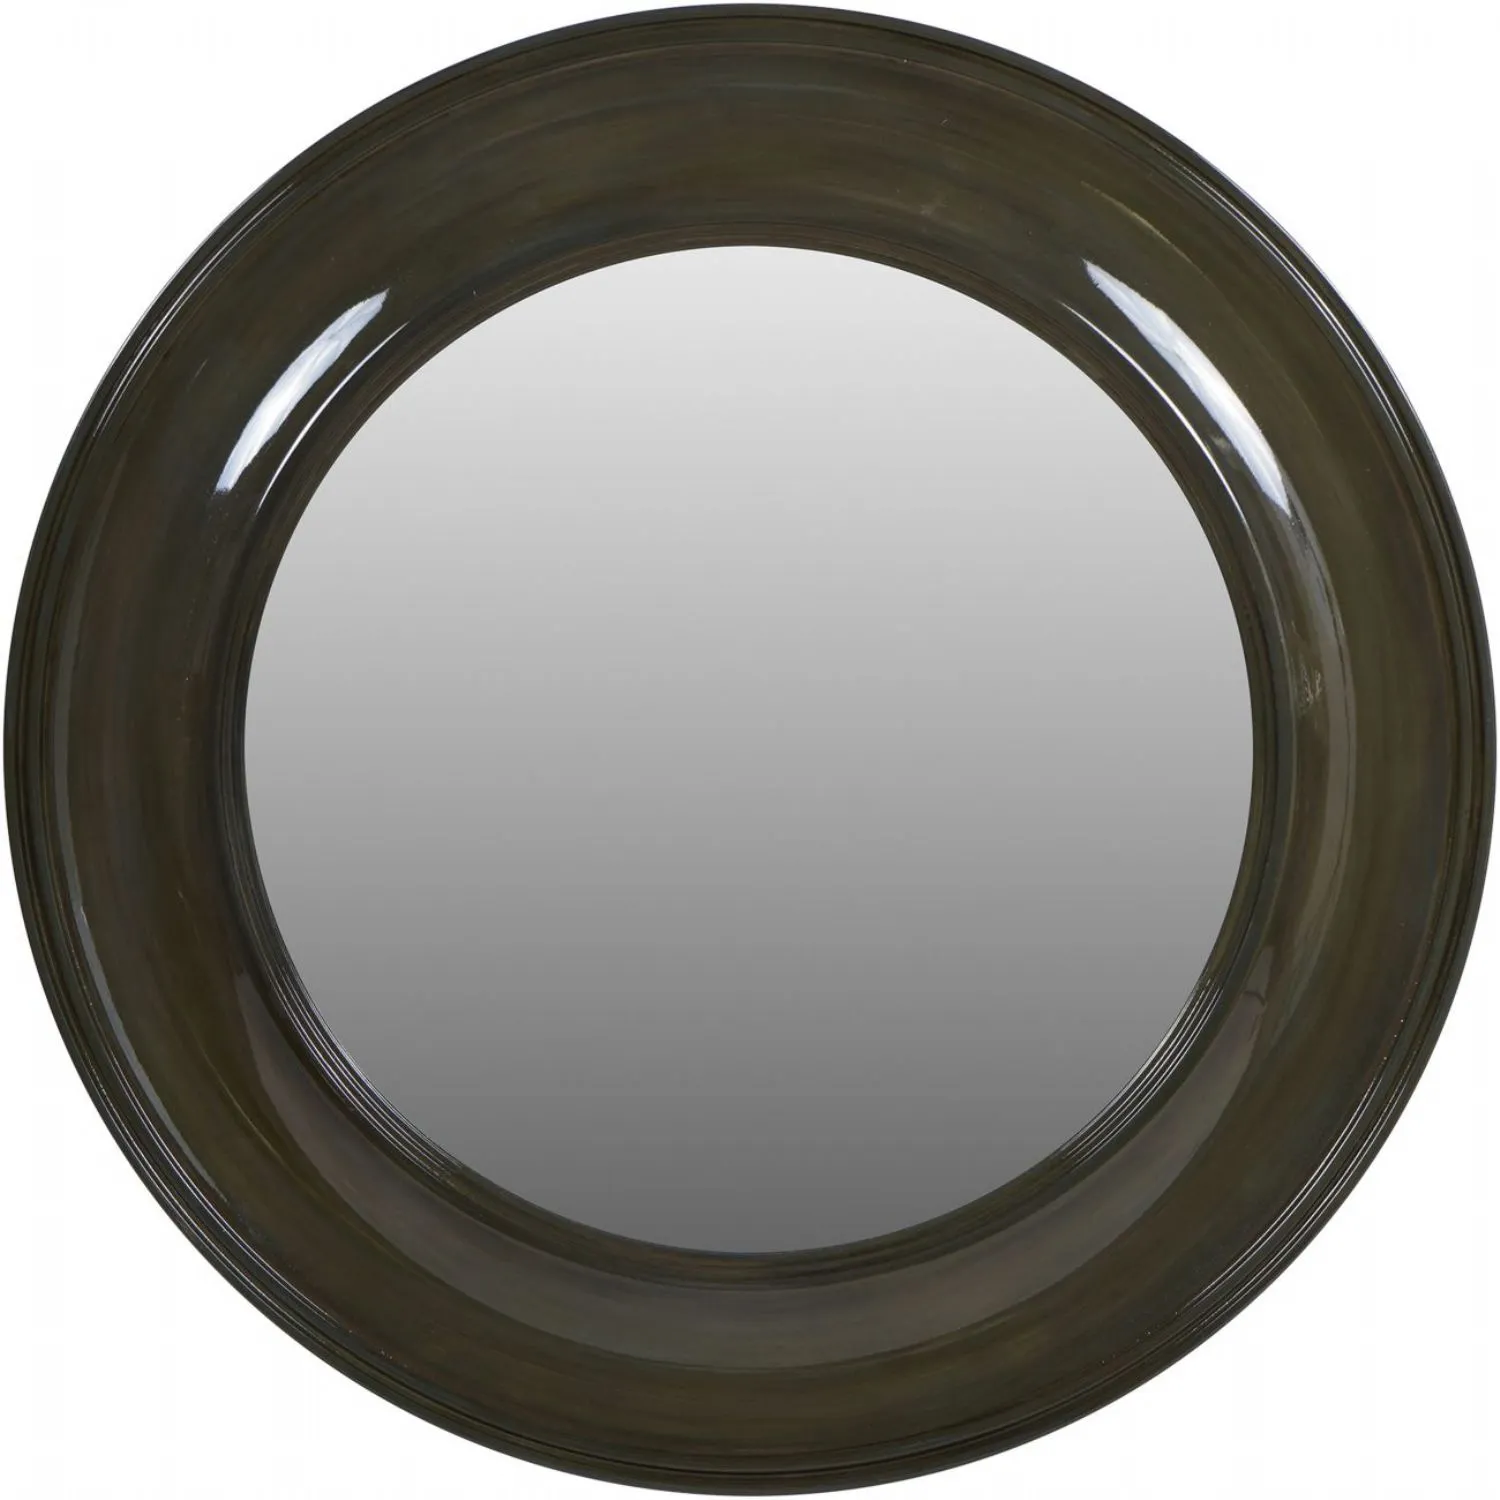 Olive Lacquer Finish Wooden Round 80cm Wall Mirror